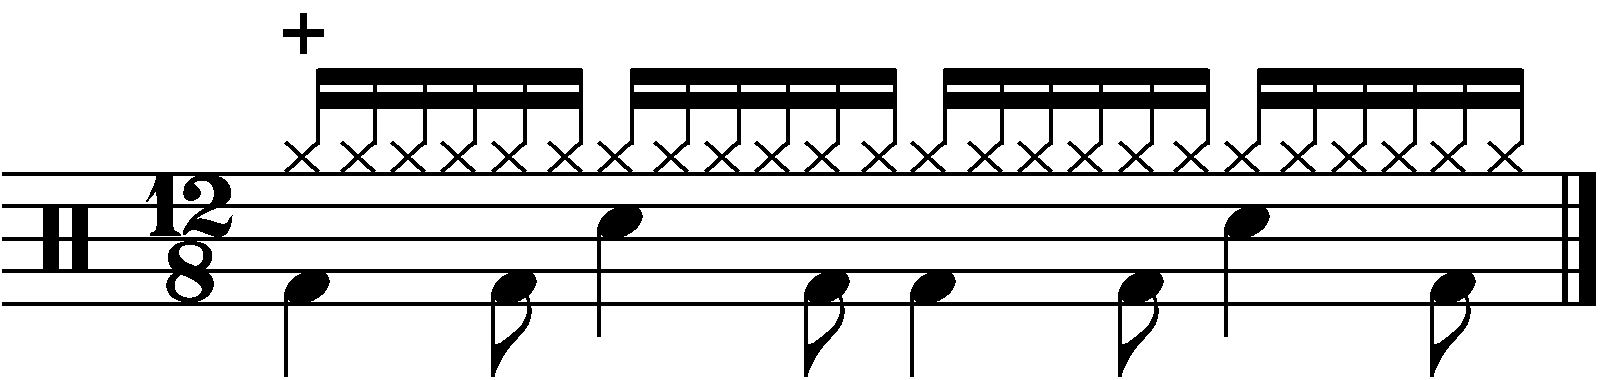 A 12/8 groove with a 16th note right hand